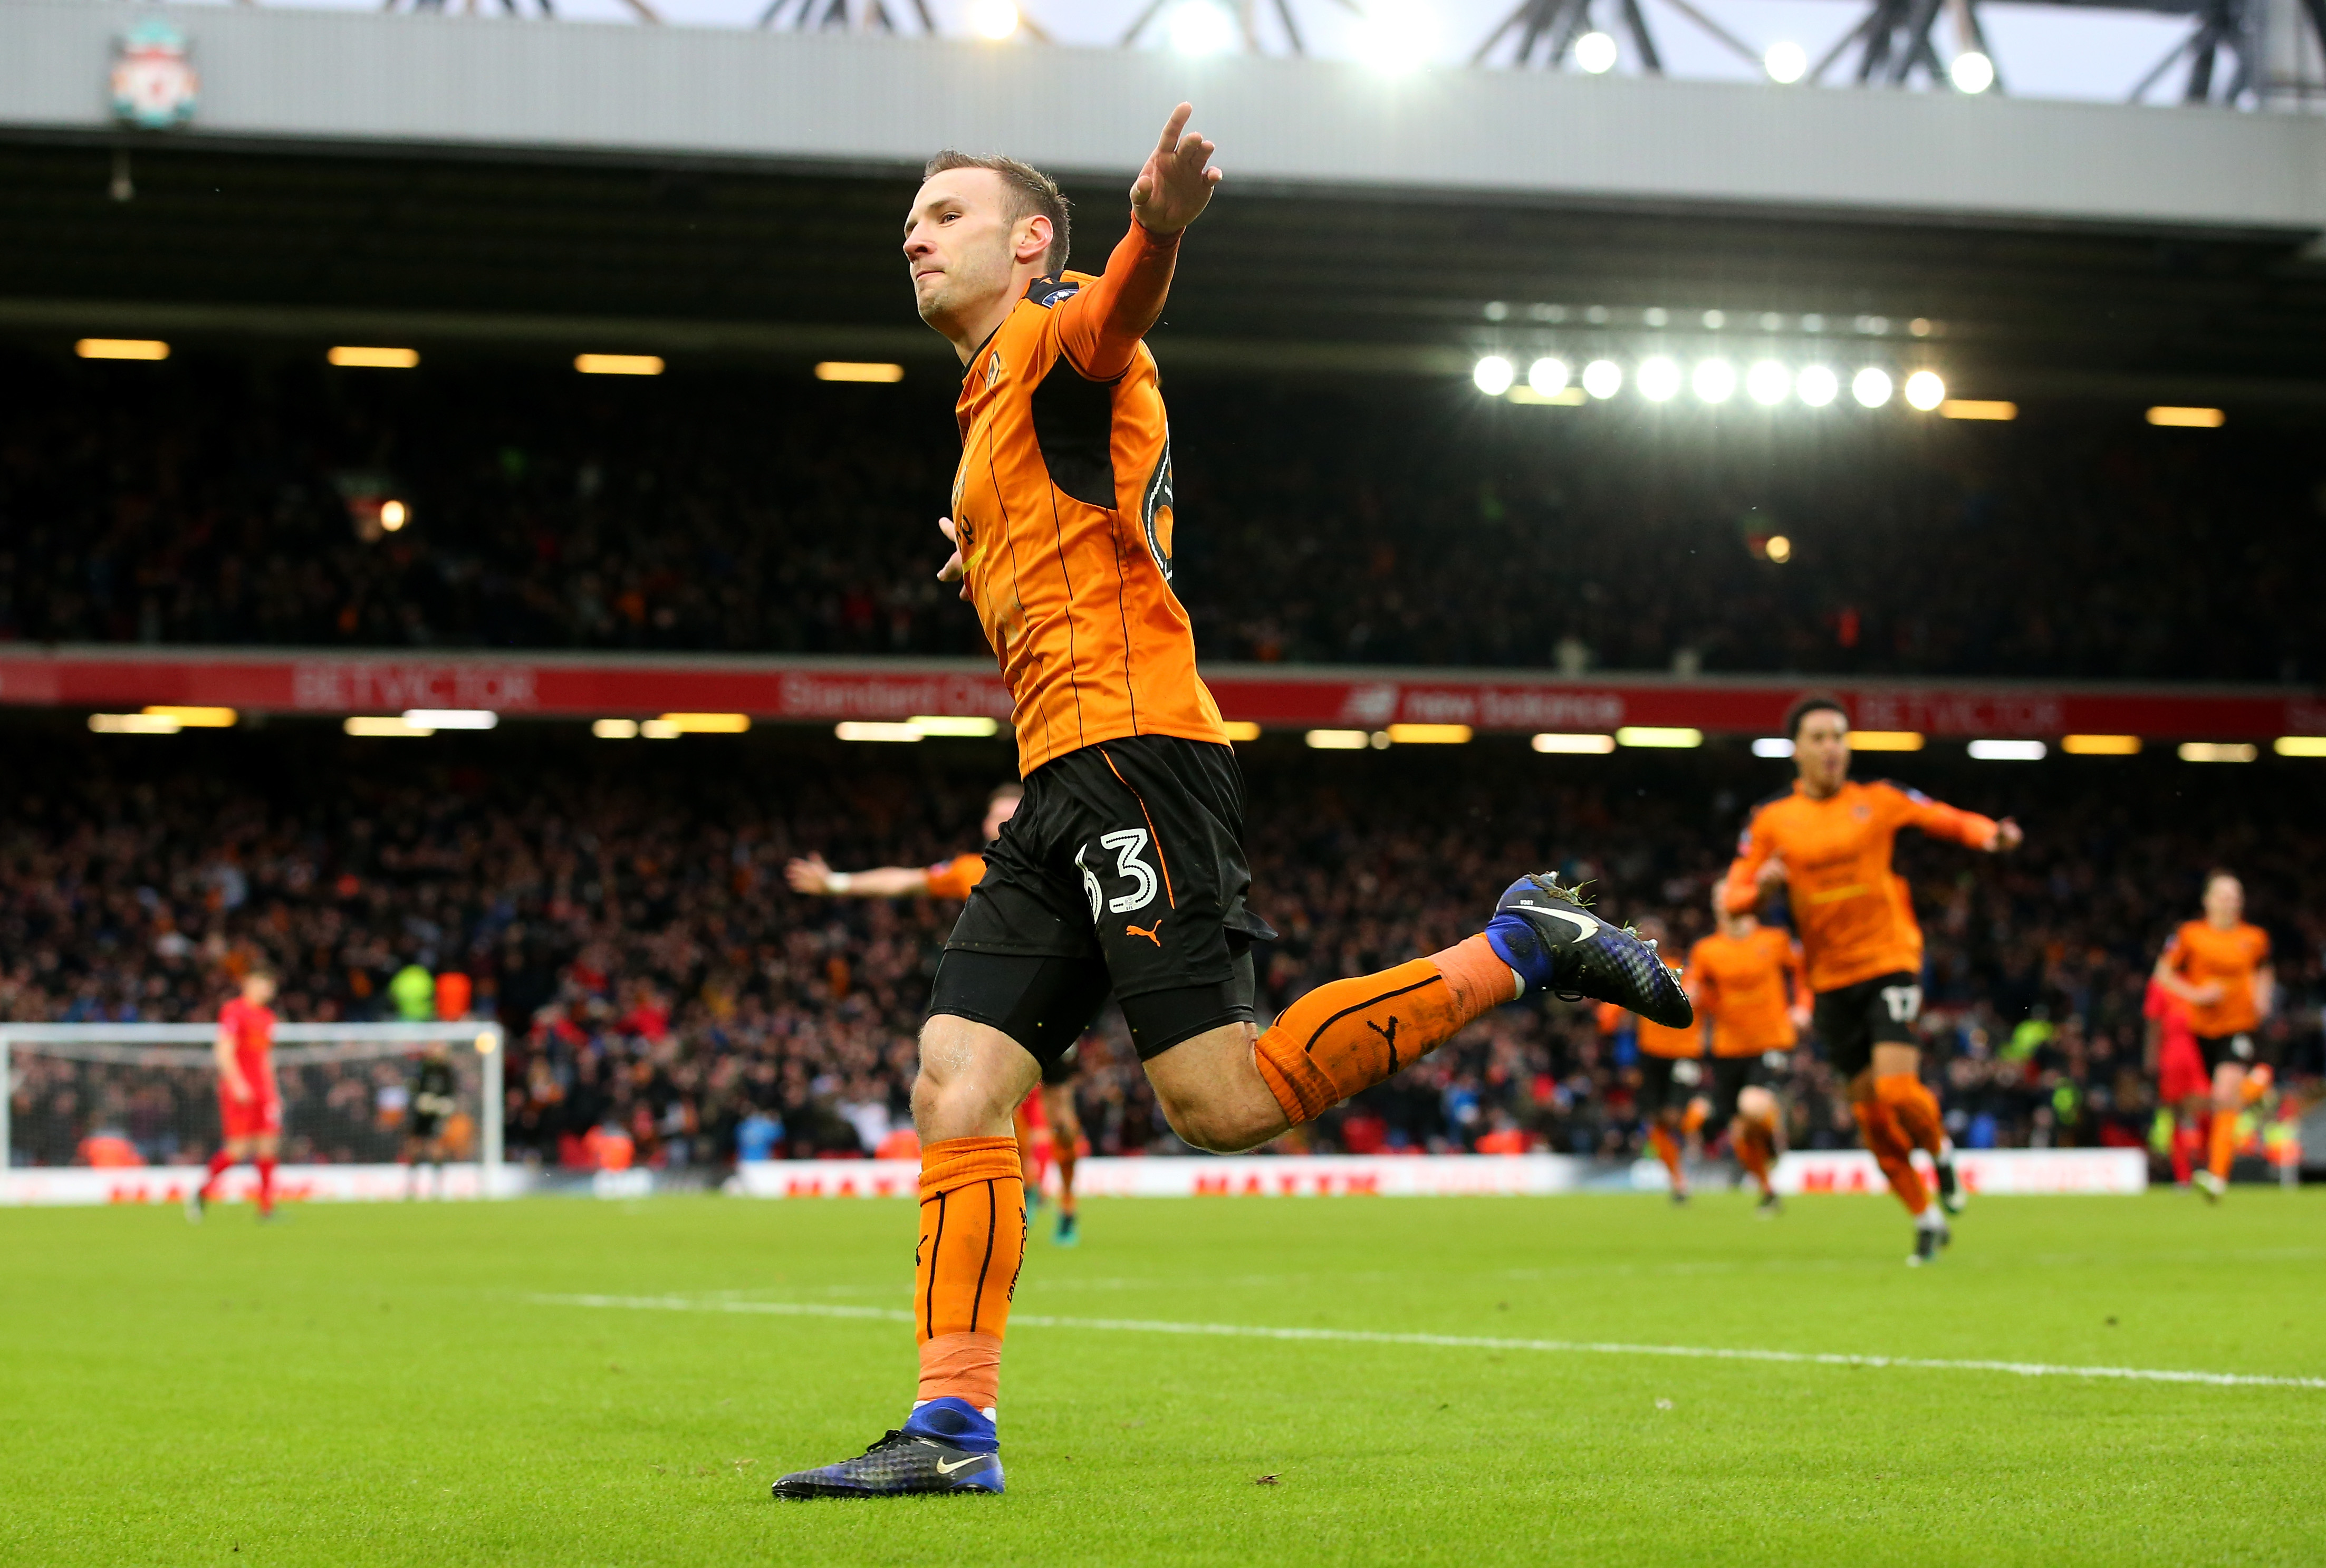 LIVERPOOL, ENGLAND - JANUARY 28:  Andreas Weimann of Wolverhampton Wanderers celebrates after scoring his sides second goal during the Emirates FA Cup Fourth Round match between Liverpool and Wolverhampton Wanderers at Anfield on January 28, 2017 in Liverpool, England.  (Photo by Alex Livesey/Getty Images)